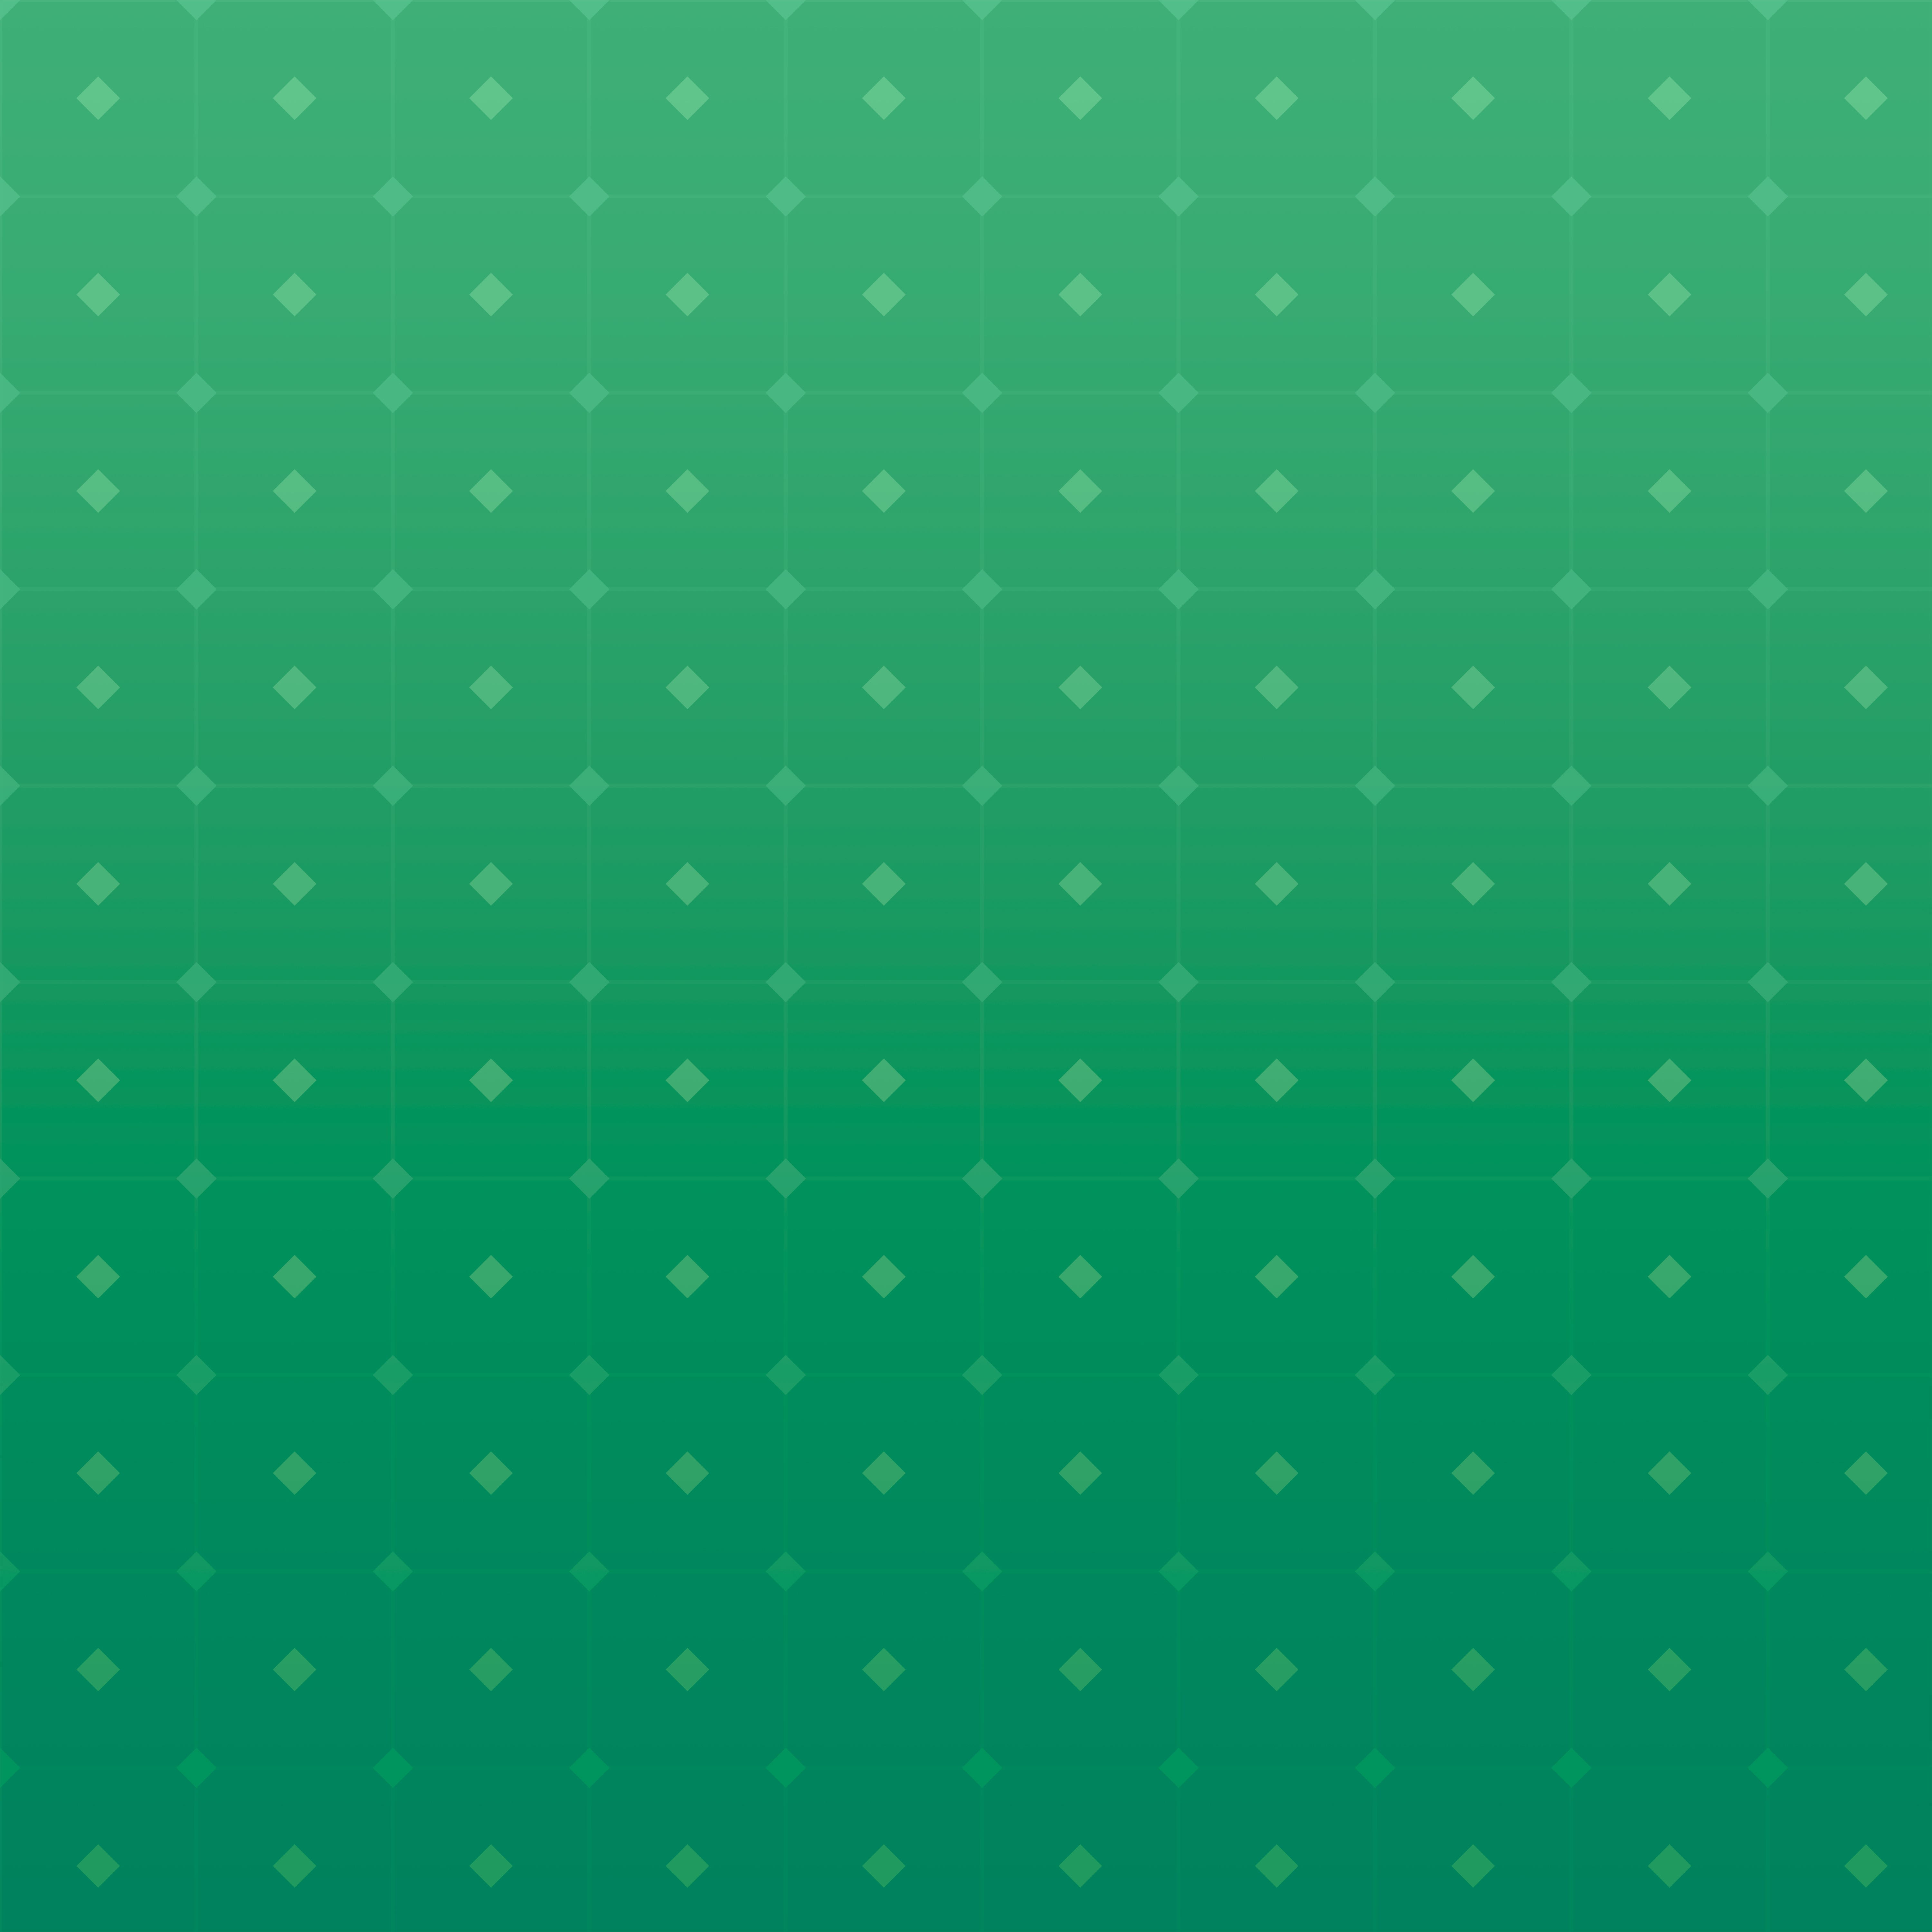 grid, gradient, green, pattern, texture, textures, squares Full HD